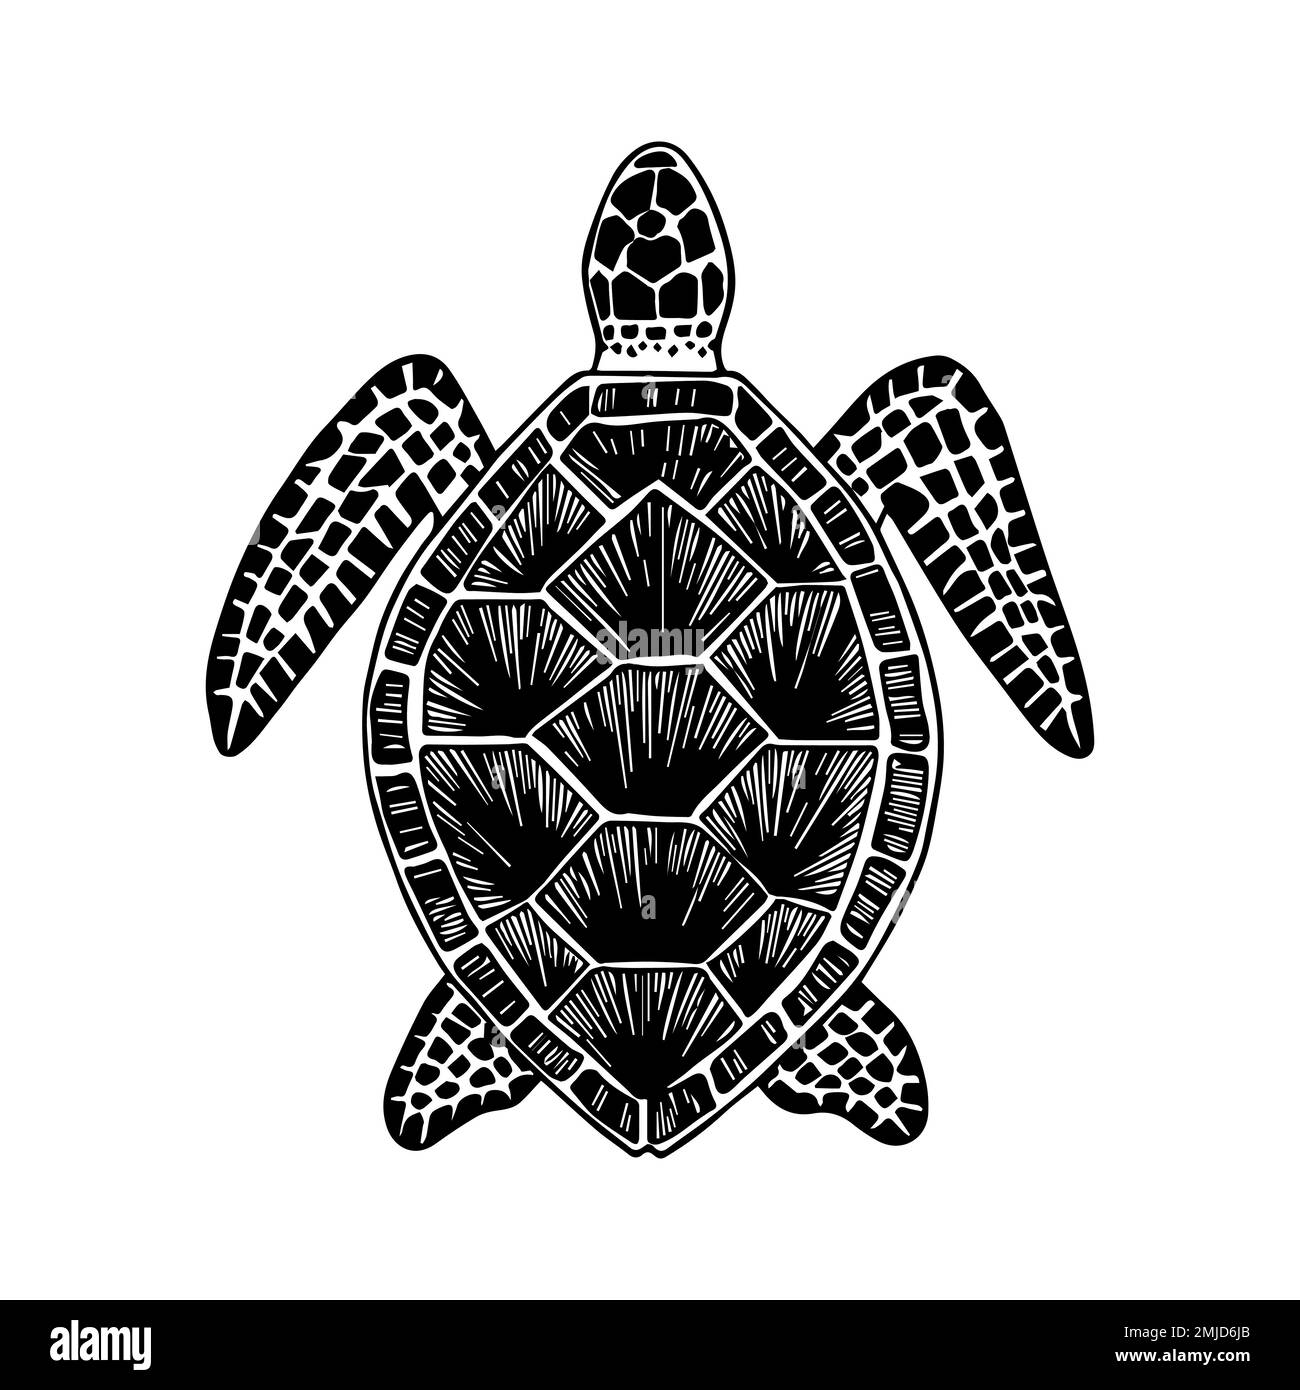 Turtle. Hand-drawn stylized image of turtle. Graphic black and white image isolated on white background. Vector illustration. Stock Vector